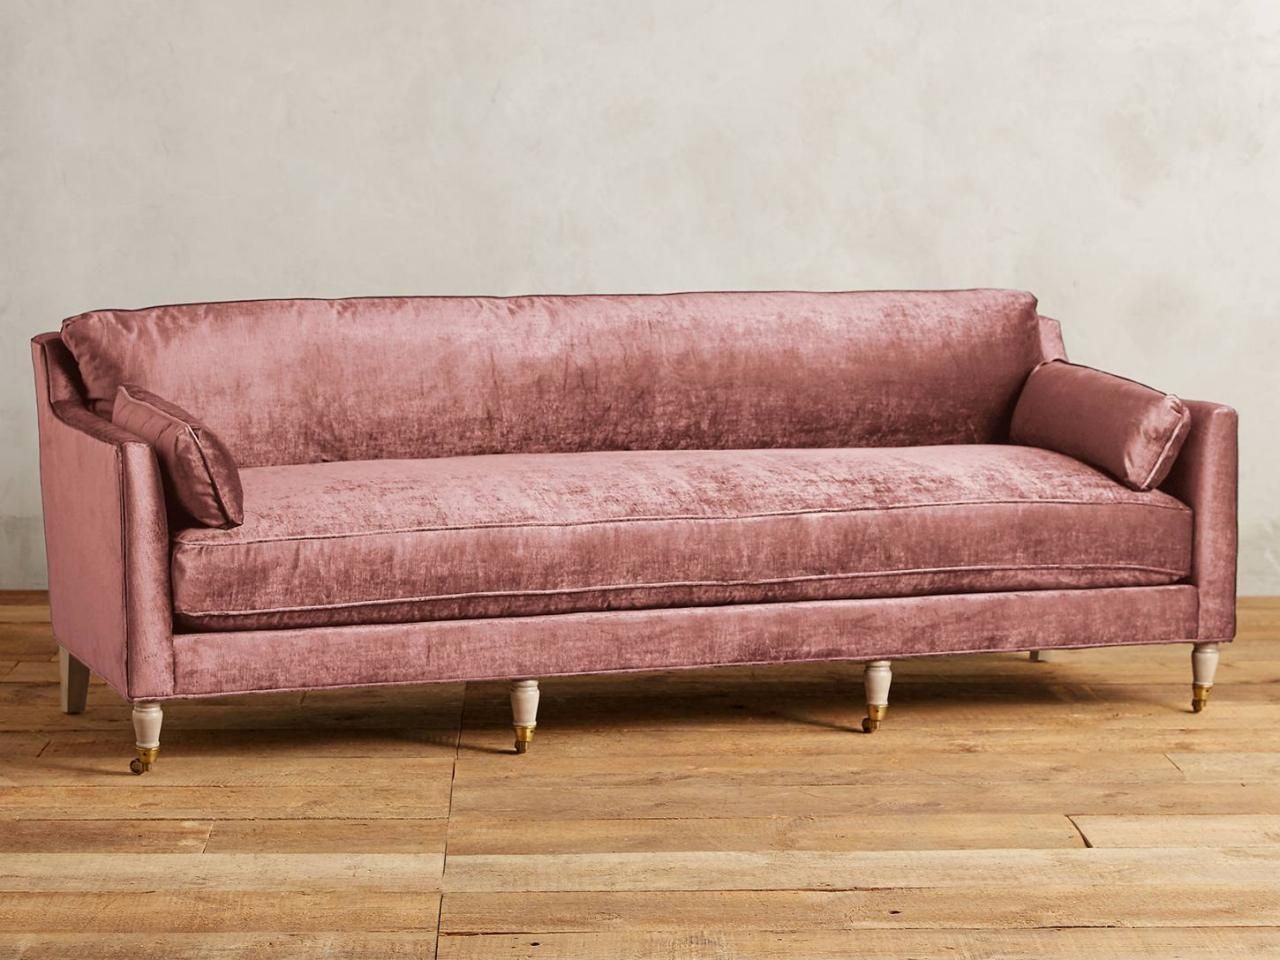 Fancy Velvet Sofas 45 For Contemporary Sofa Inspiration With With Fancy Sofas (View 11 of 20)